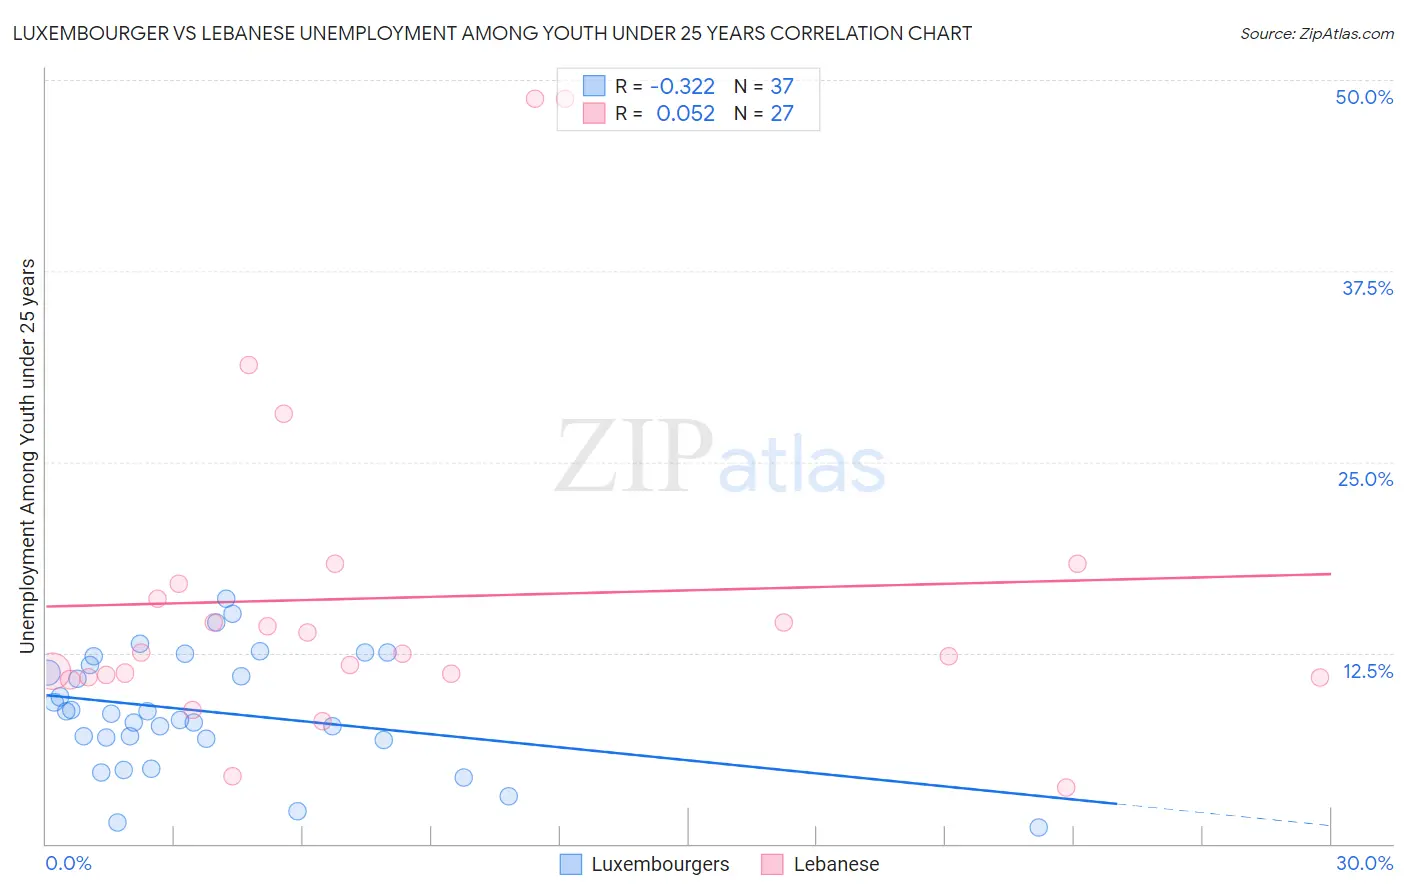 Luxembourger vs Lebanese Unemployment Among Youth under 25 years